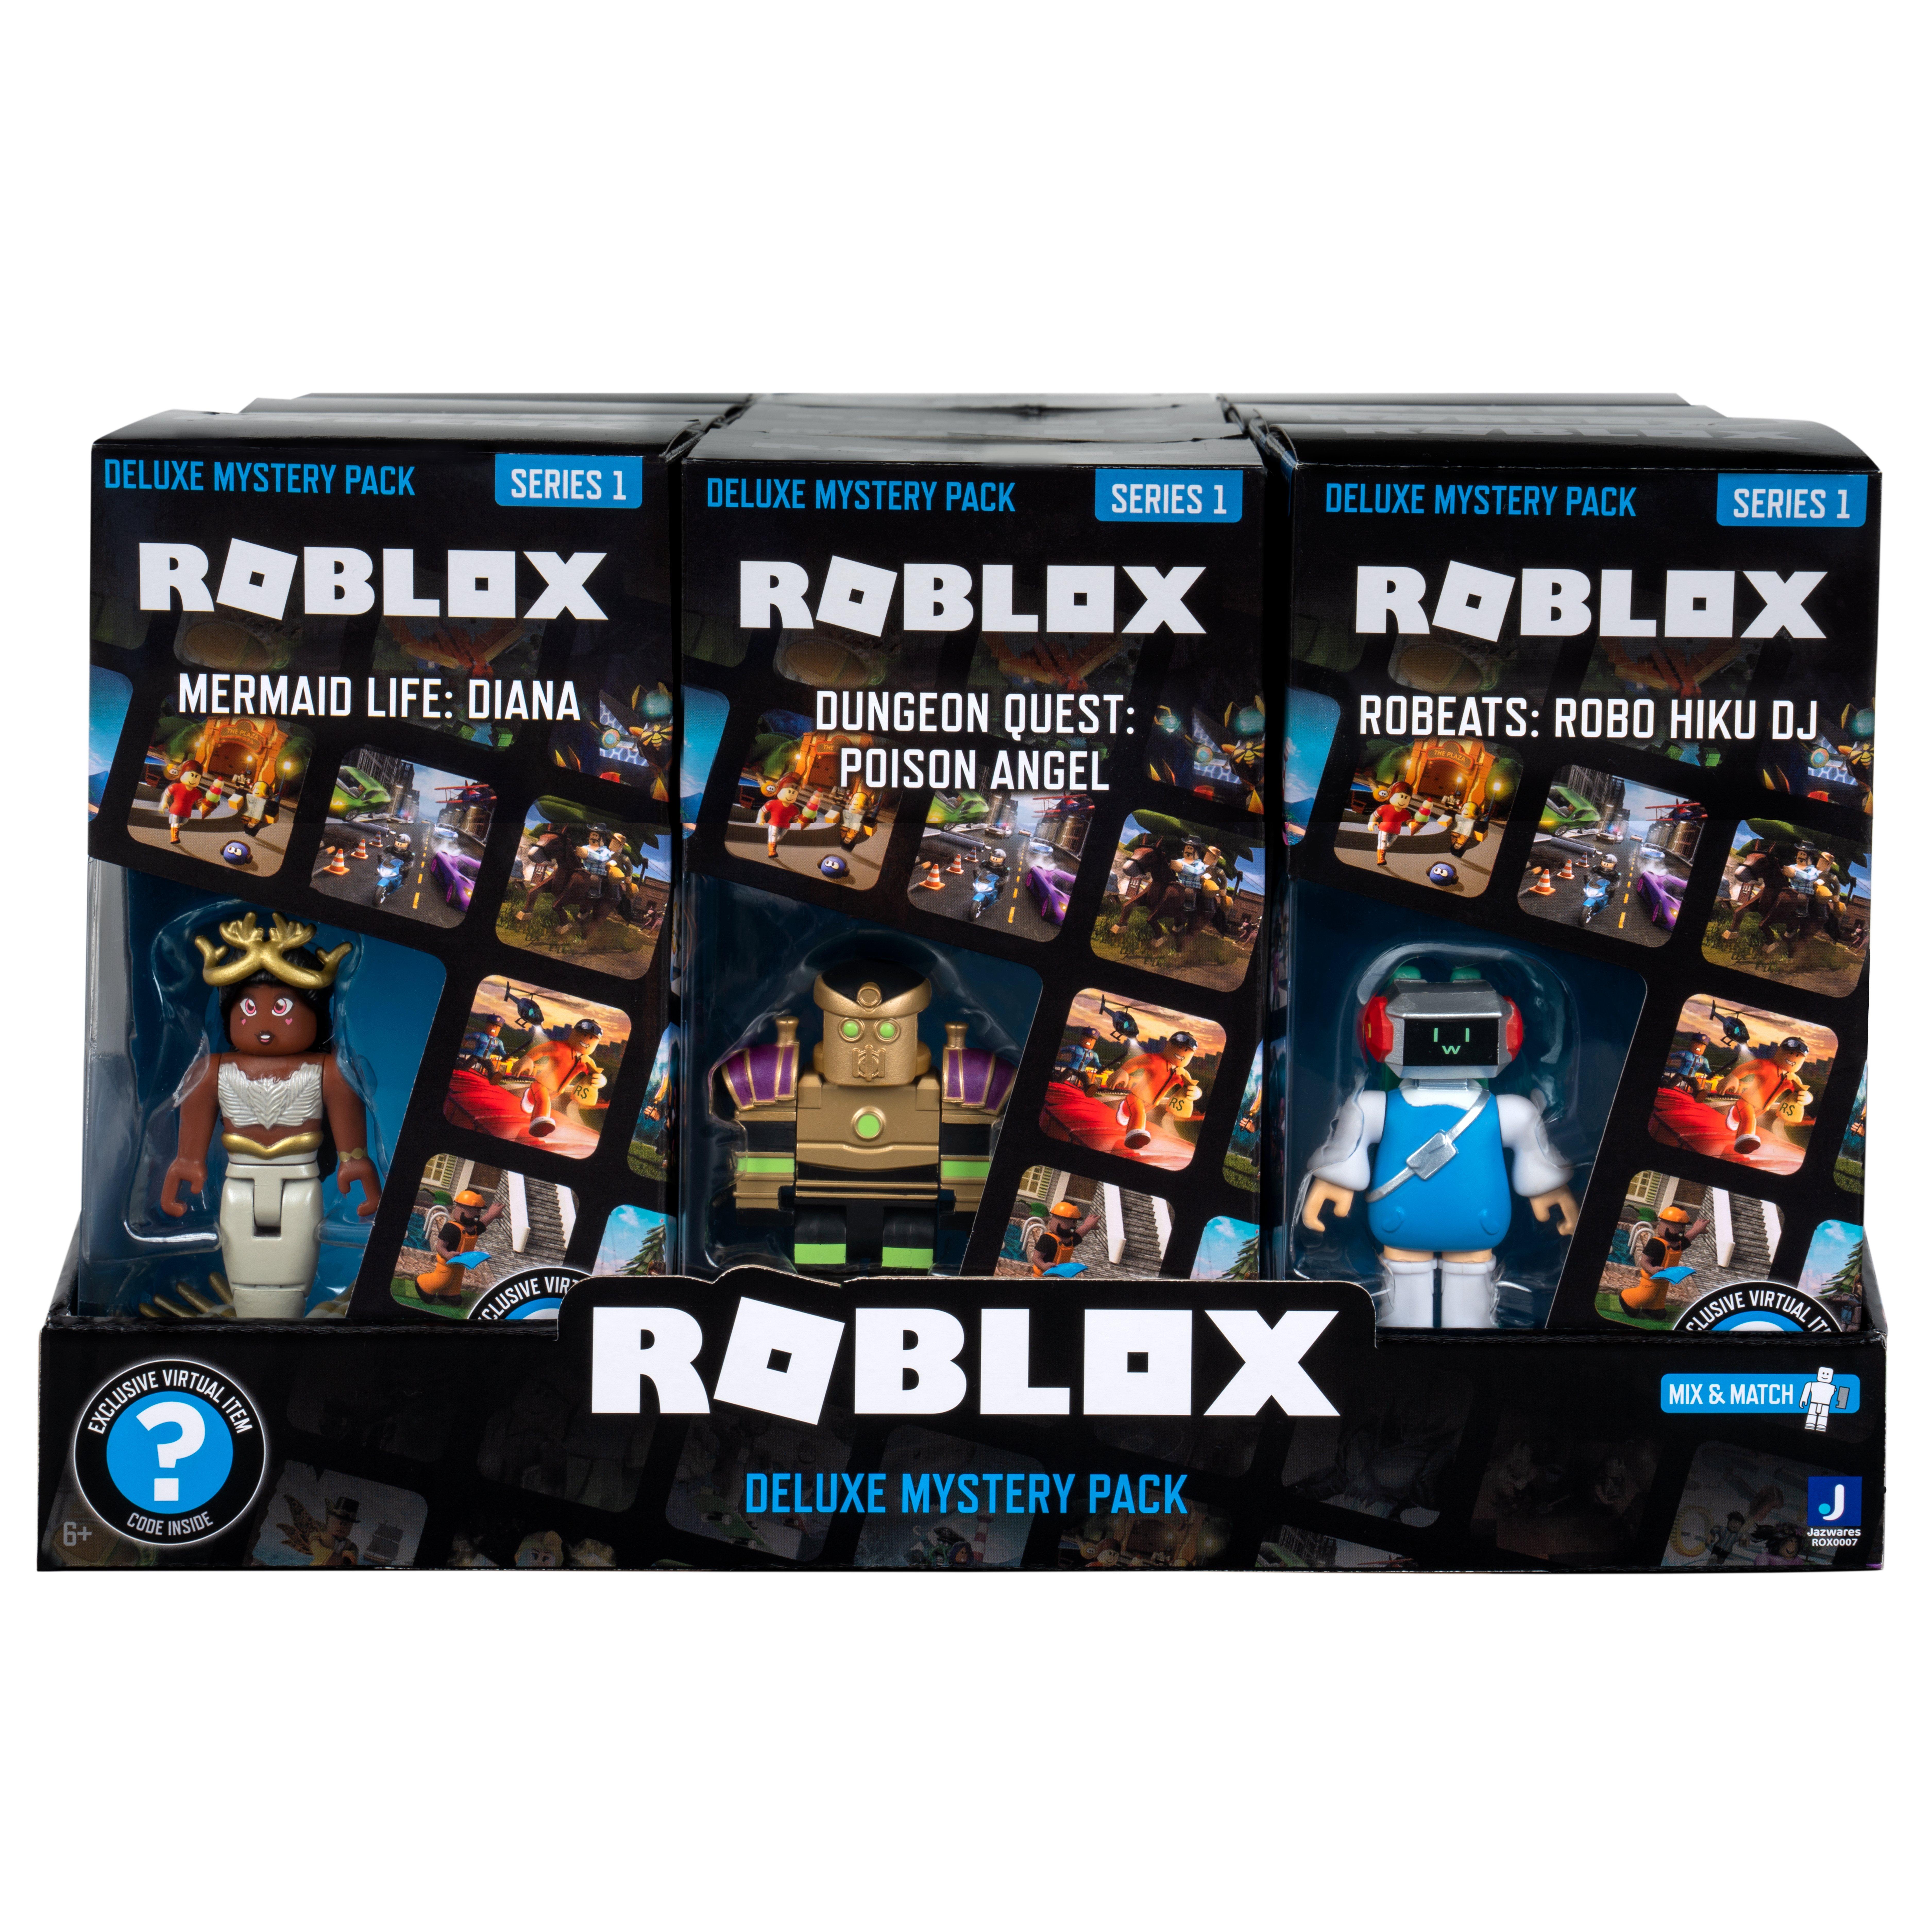 Roblox Toys - Roblox Figures - Roblox Mystery Bags, Roblox Blind Boxes, Roblox  Blind Bags - All Roblox Fun! 